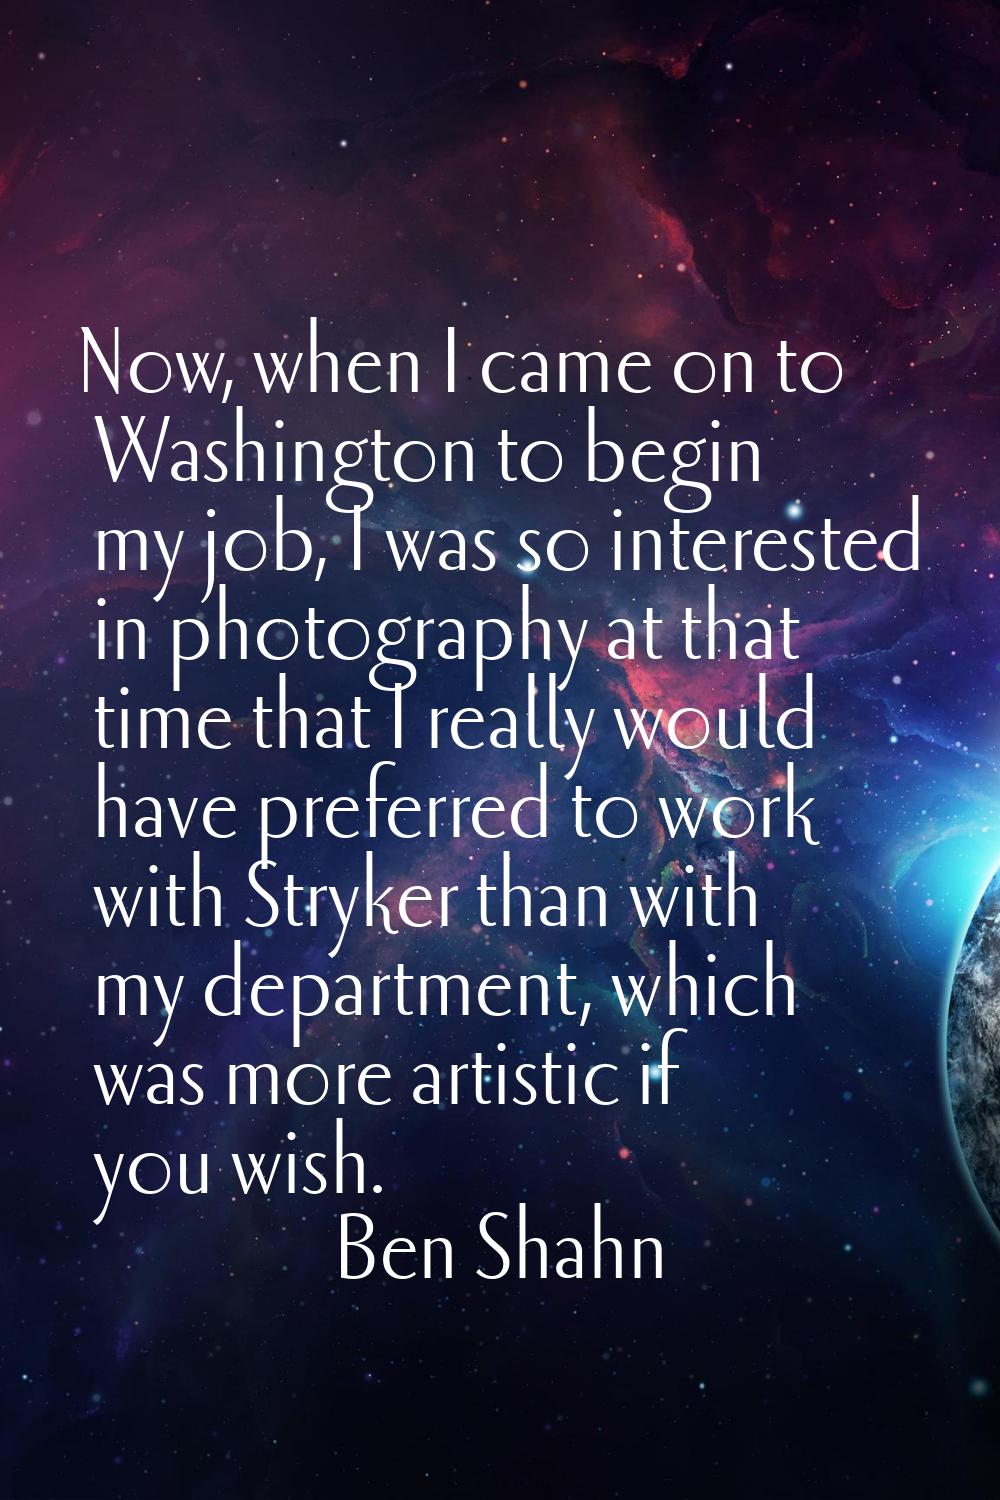 Now, when I came on to Washington to begin my job, I was so interested in photography at that time 